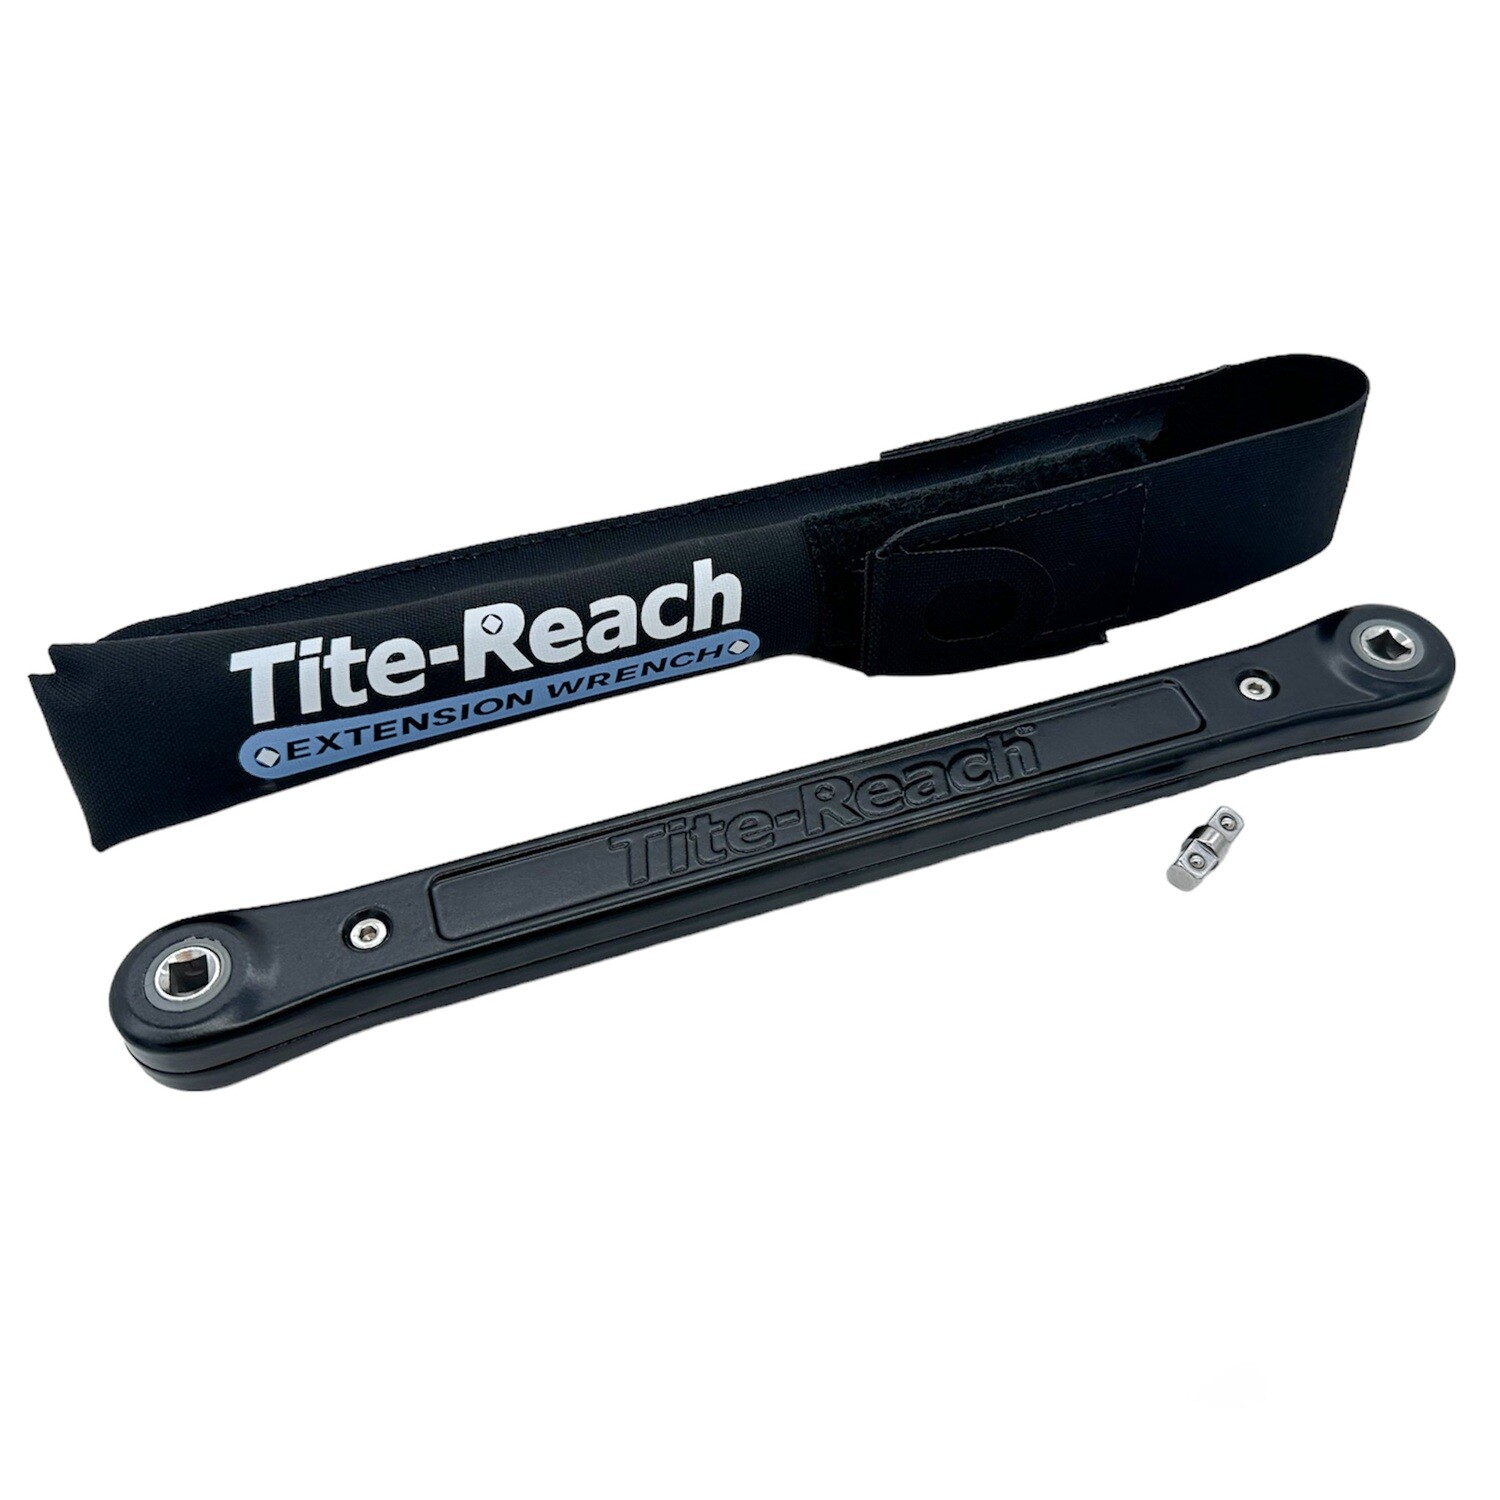 TITE-REACH EXTENSION WRENCH 3/8